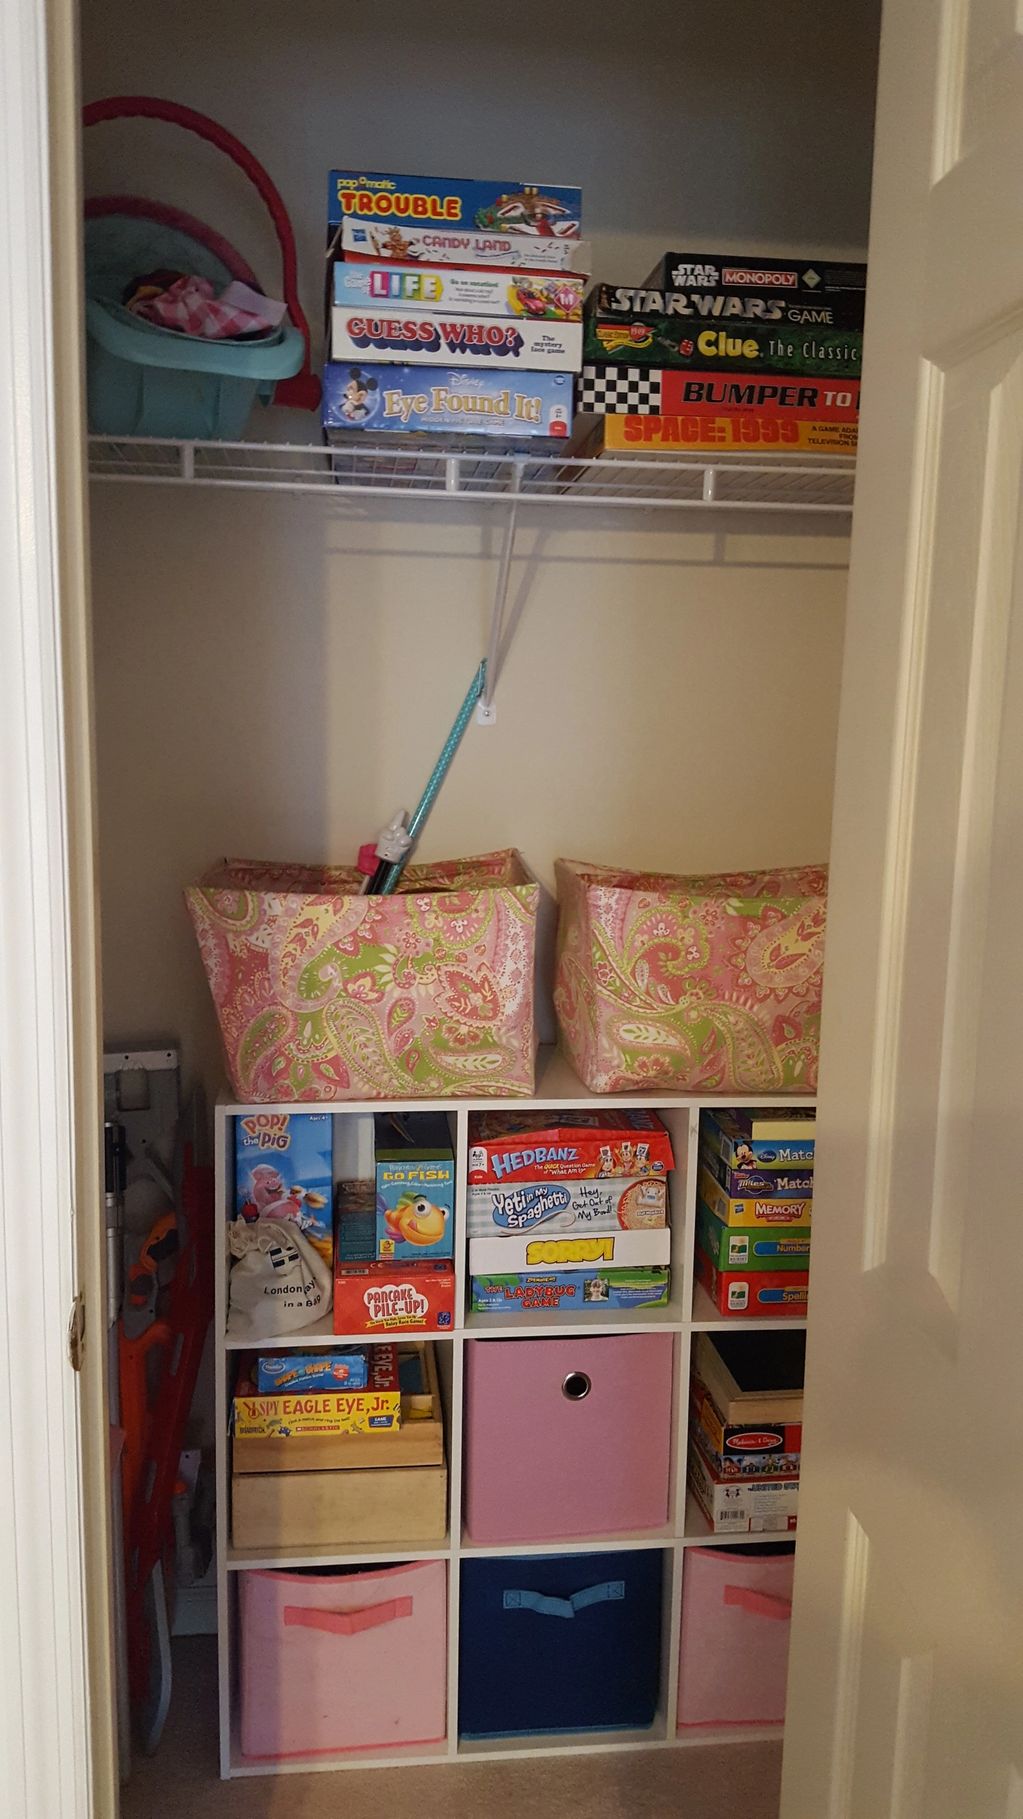 re-purposing items found in playroom for optimal function and professional organization